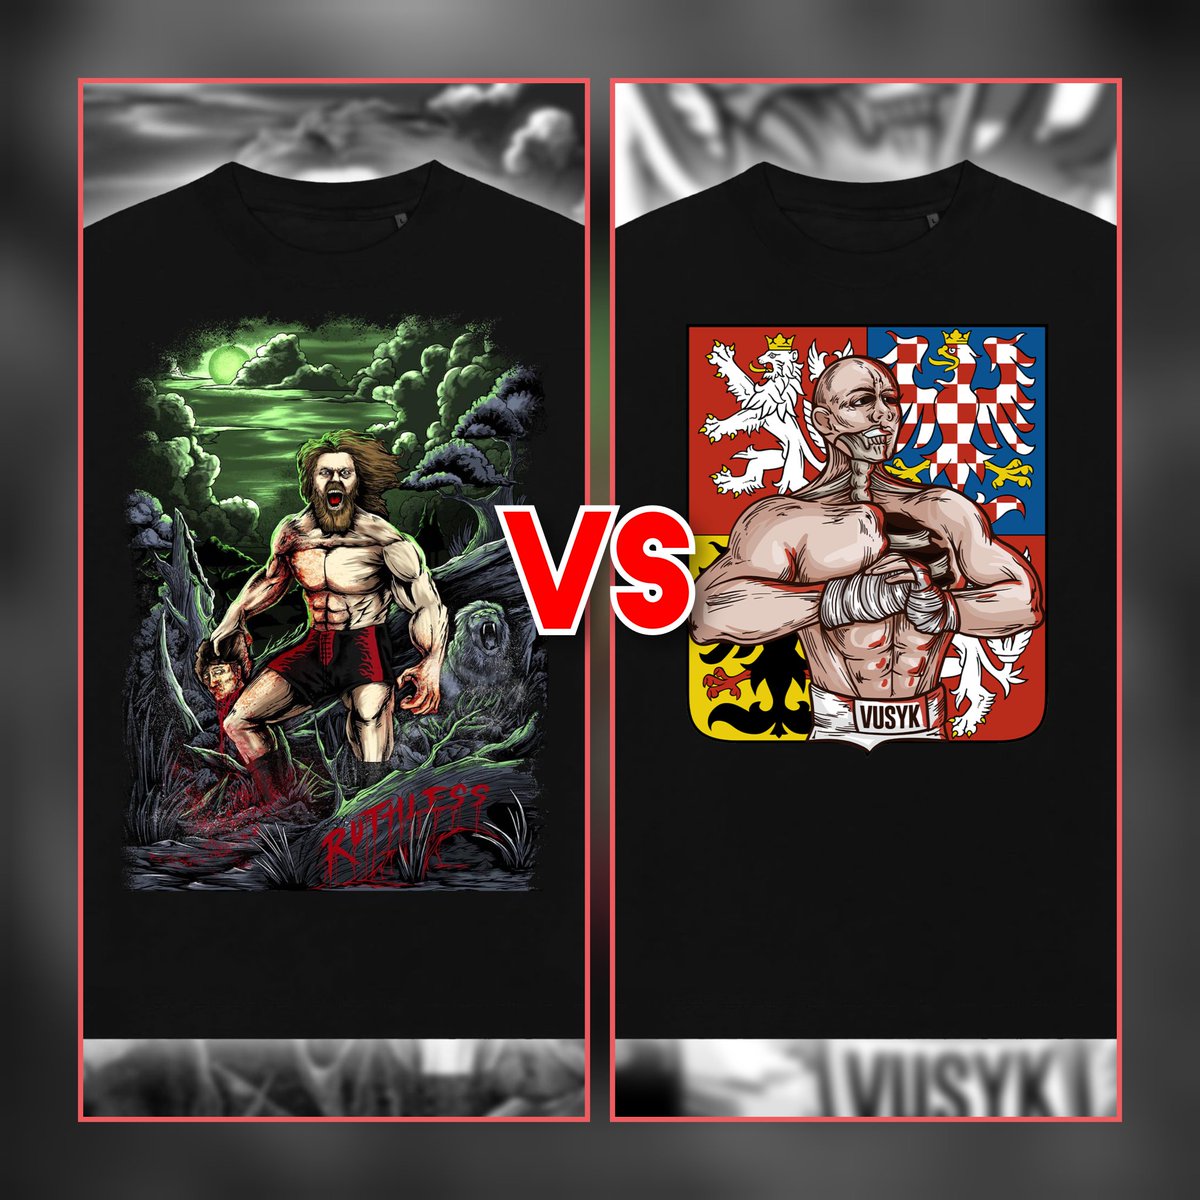 Coming Soon at @TIDALWRESTLING @Vusyk_CZ Vs @RobDrakePro Awesome match graphic from Tidal Alternative FastCount match graphic